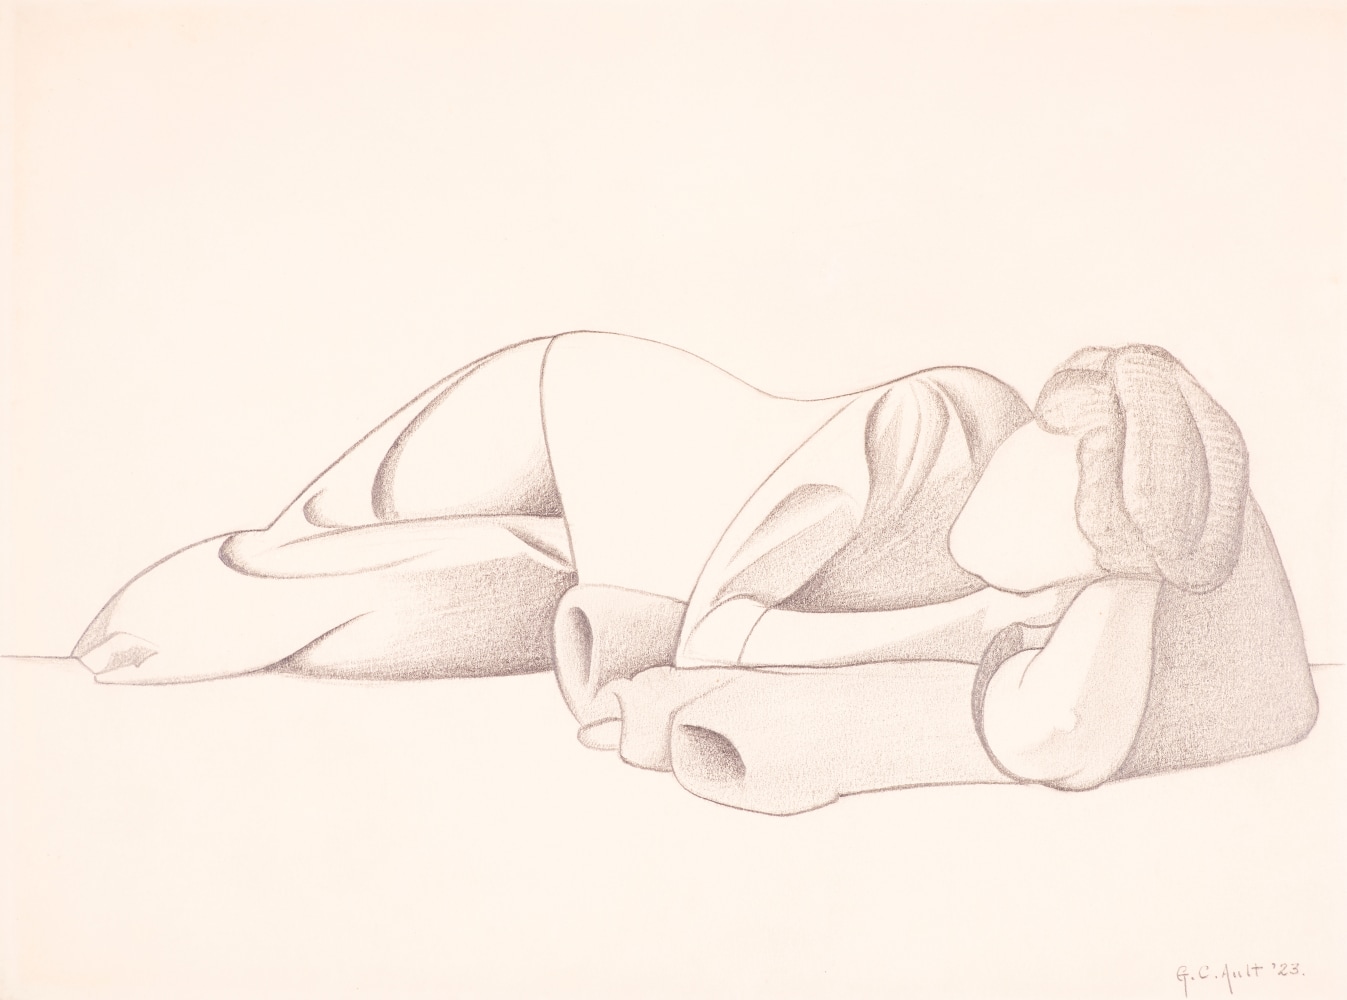 George C. Ault (1891–1948), Reclining Figure, 1923, pencil on paper, 8 ⅞ x 11 ⅞ in., signed and dated lower right: George C. Ault ’23 Inscribed in pencil on verso: 135 –